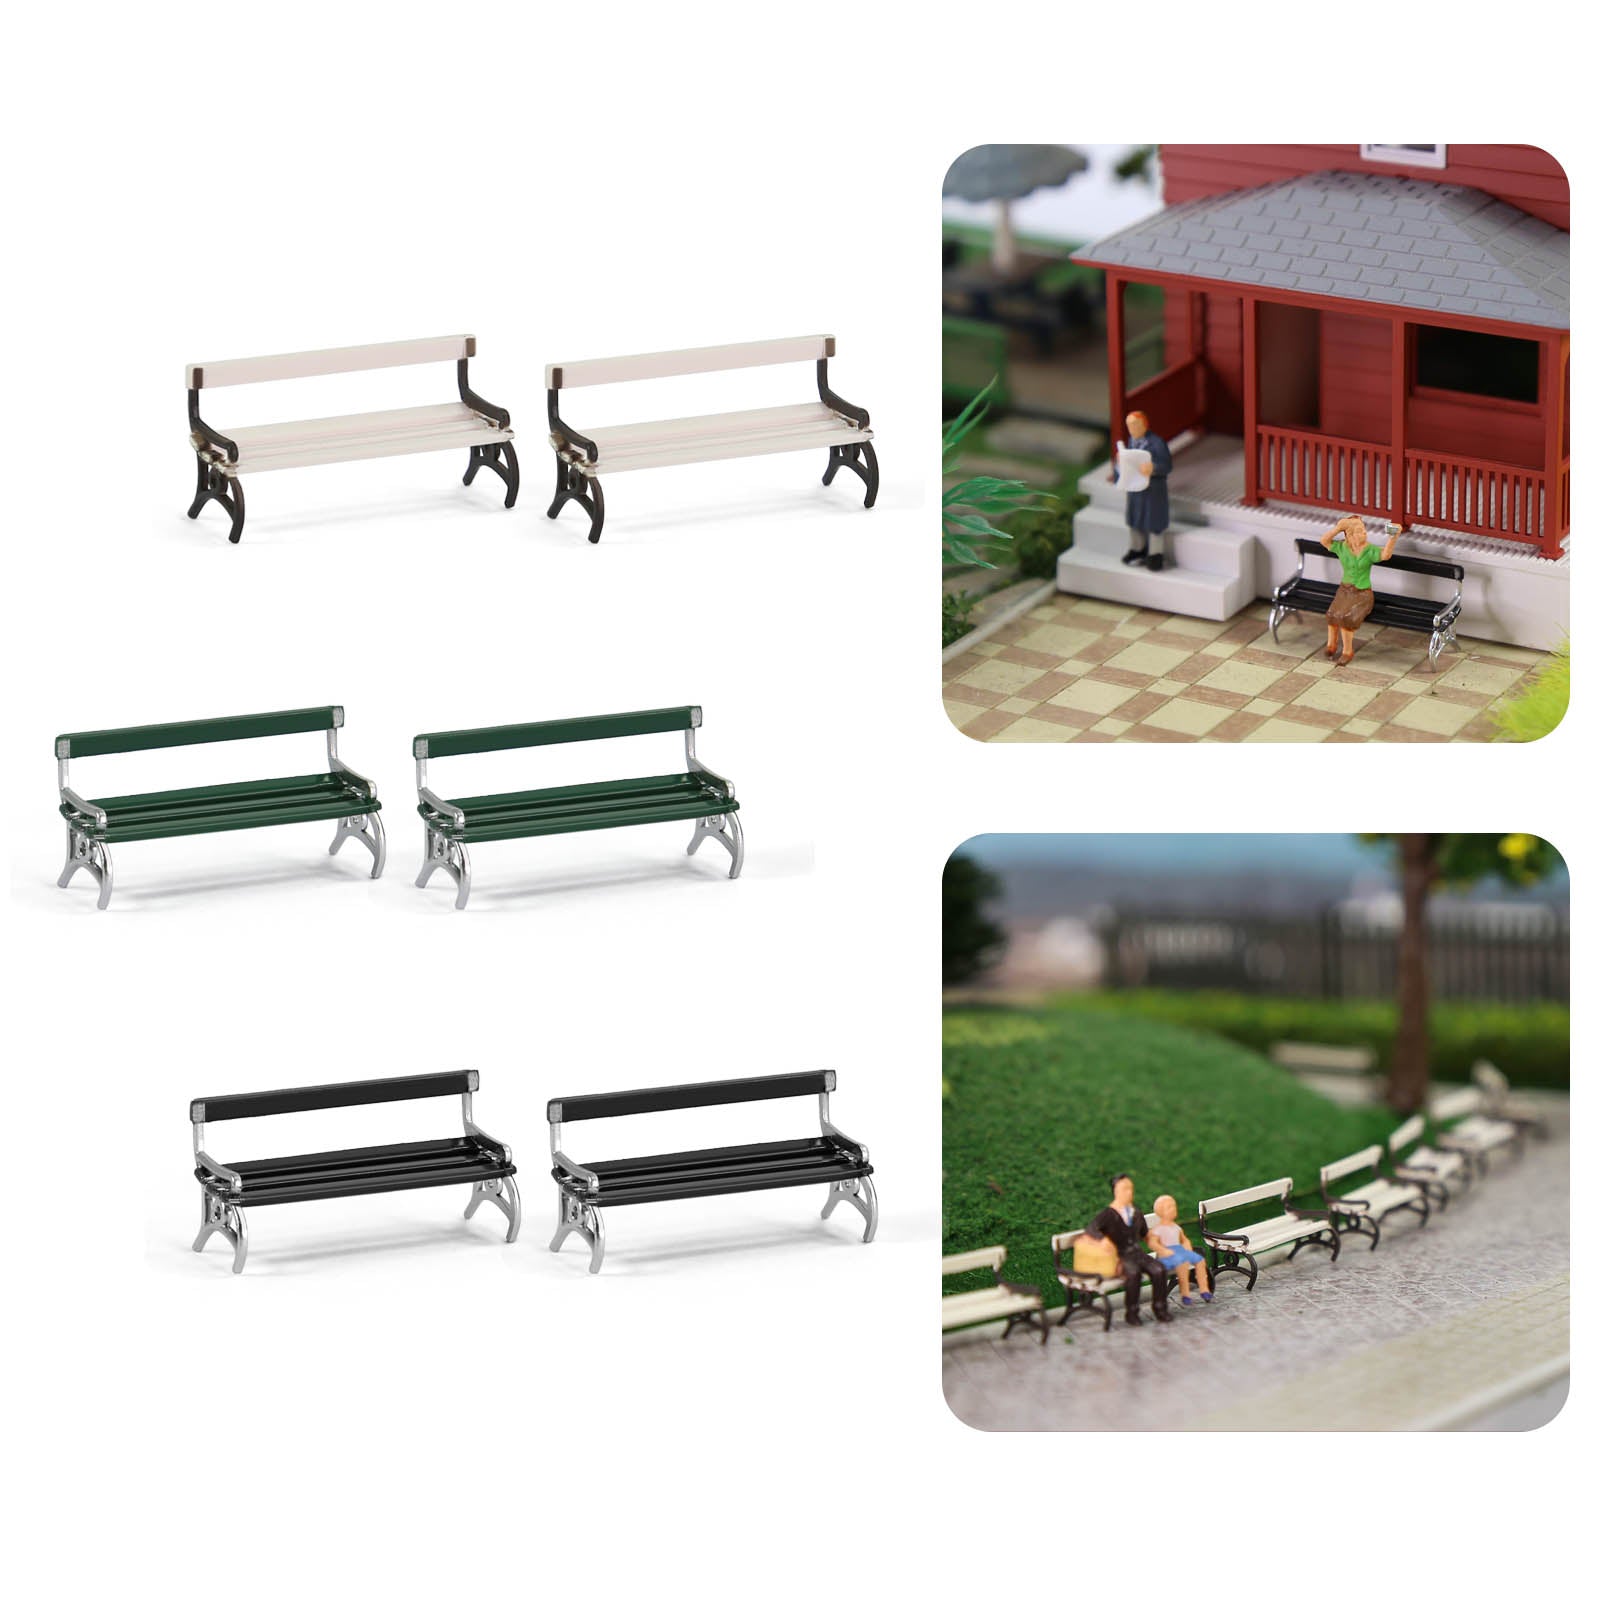 ZY37087 12pcs HO Scale 1:87 Garden Park Benches Street Platform Station Chairs